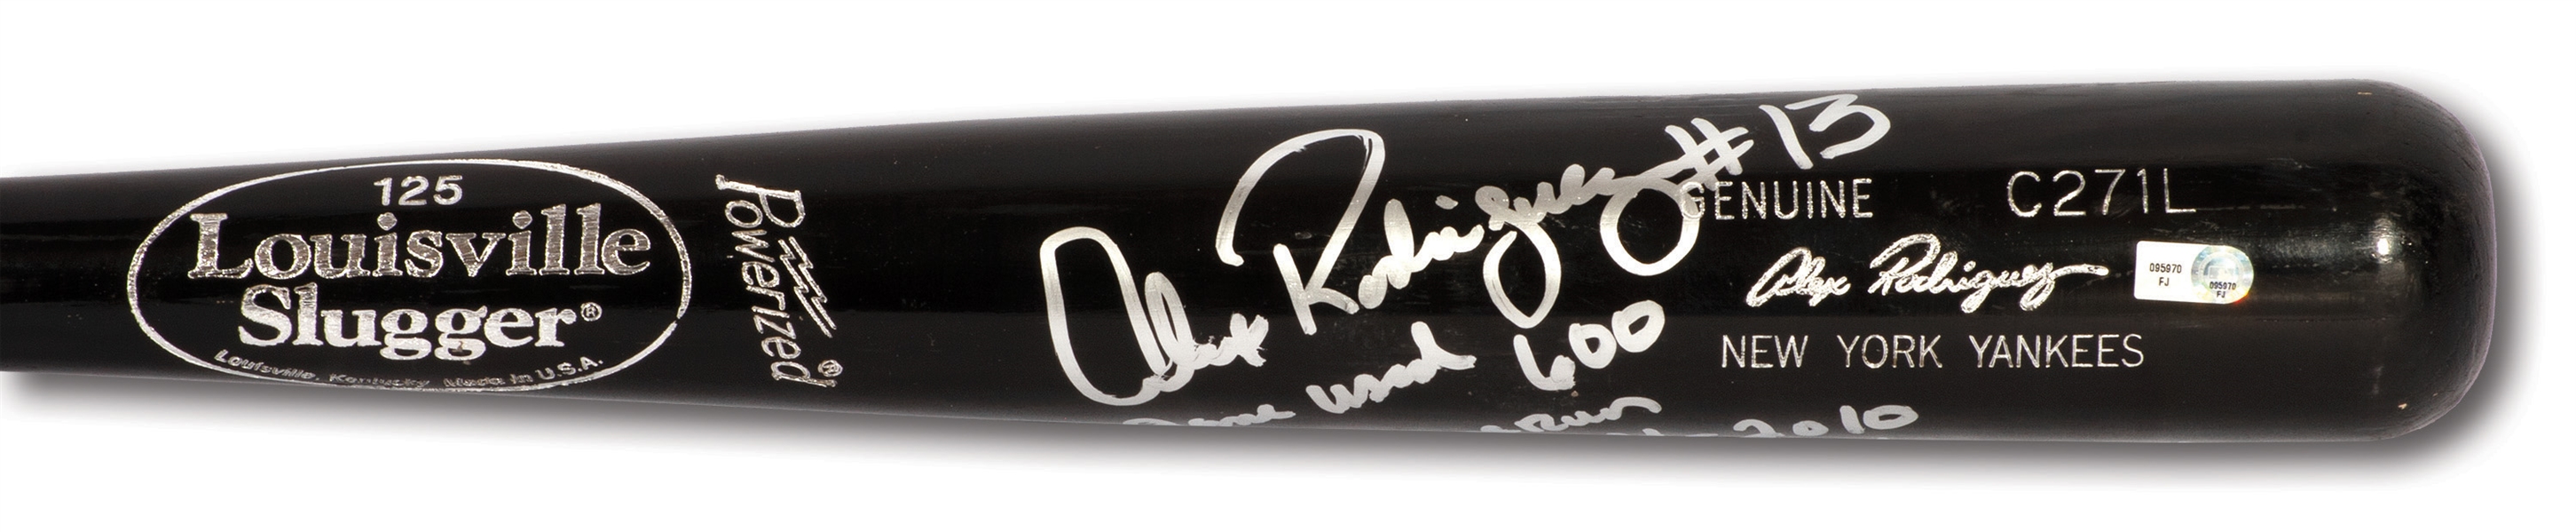 8/4/2010 ALEX RODRIGUEZ 600TH CAREER HOME RUN BAT - SIGNED, INSCRIBED & PHOTO-MATCHED (A-ROD & RESOLUTION LOAS, MLB AUTH.)